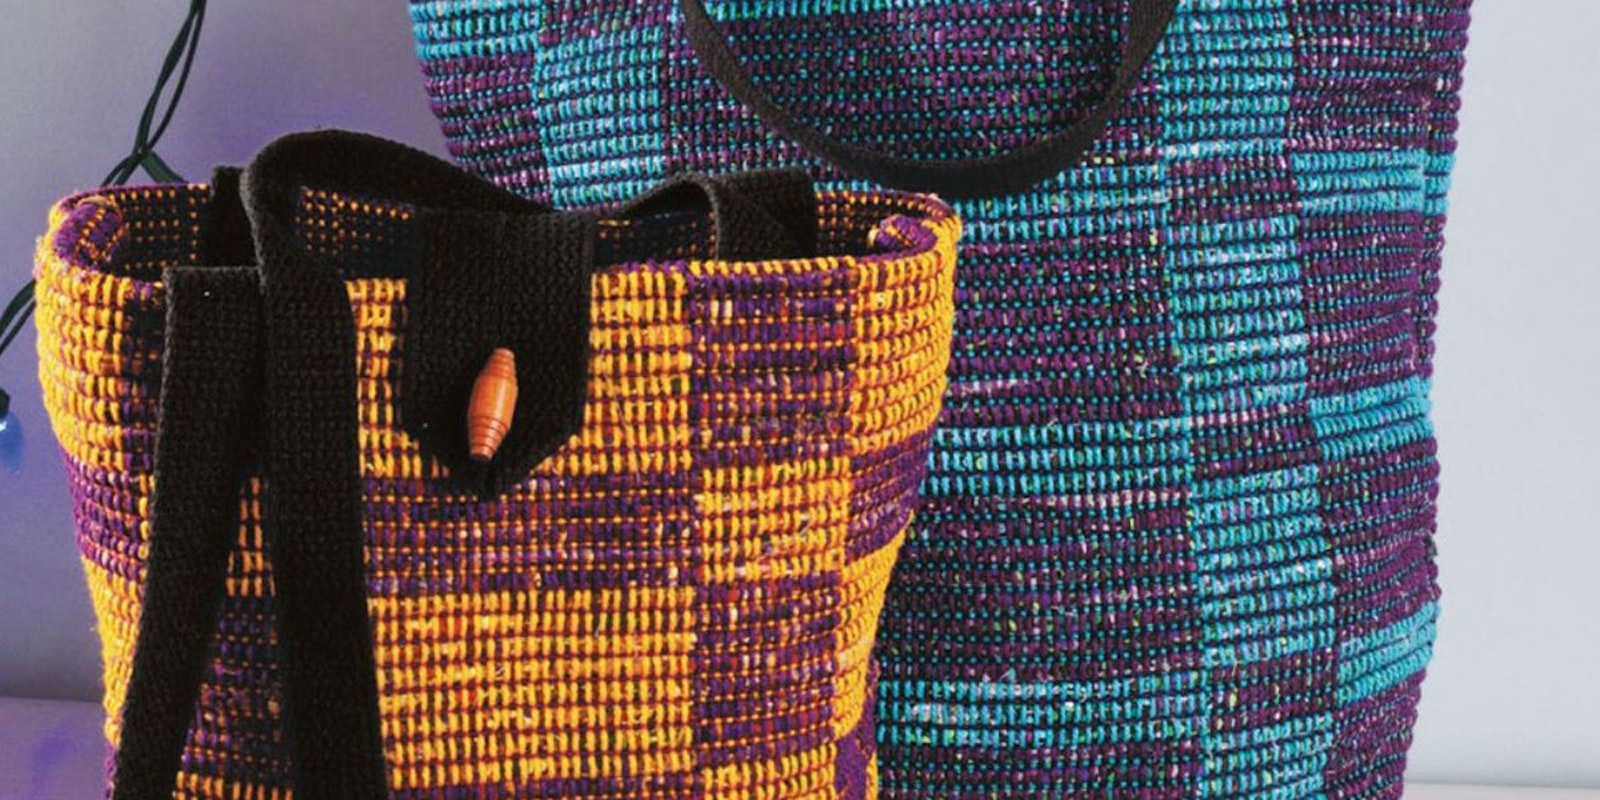 Learn to Make Woven Bags with Free Woven Bag Projects